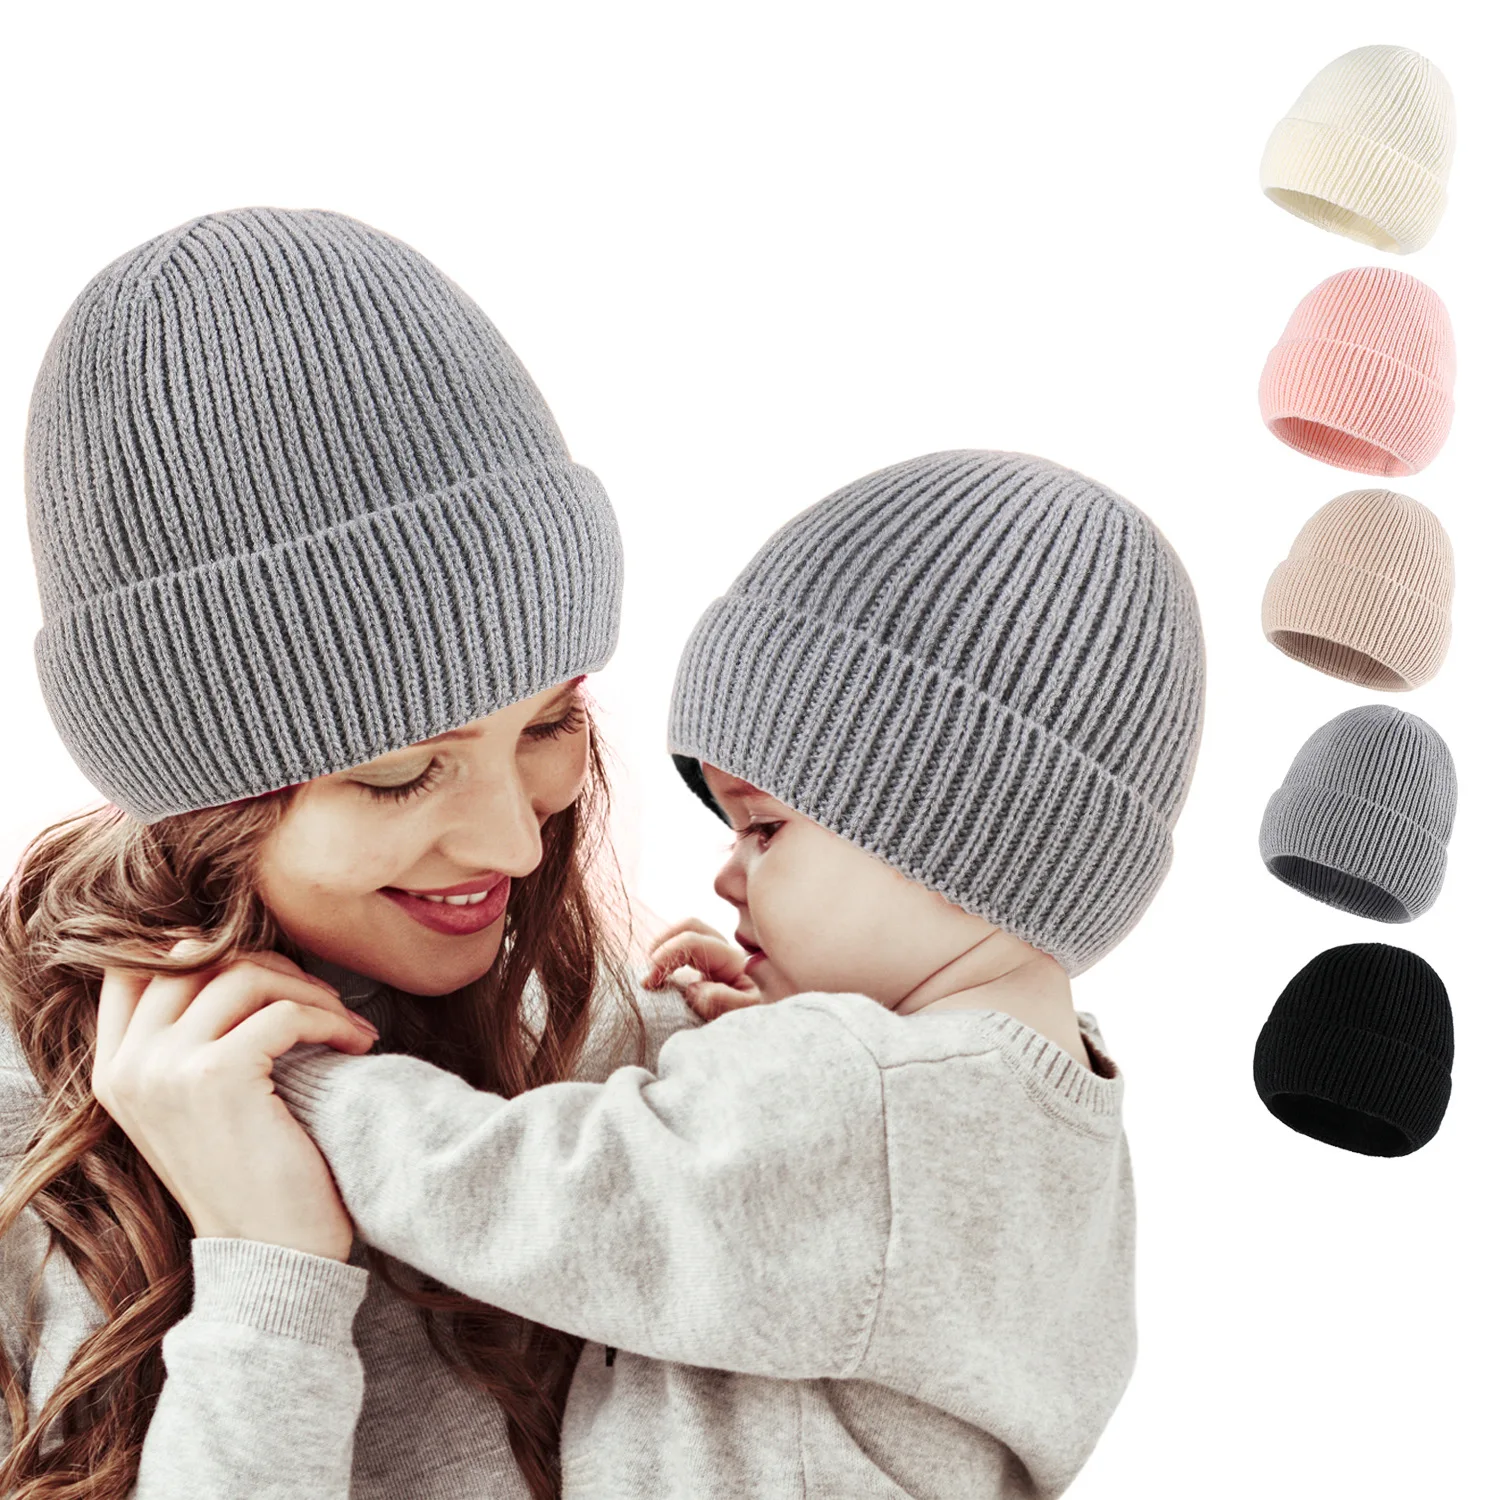 

Fashion Set Mom Mother Baby Knit Pom Bobble Hat Kids Girls Boys Ball Wool Winter Warm Autumn Beanie Caps Mother daughter Son Hat